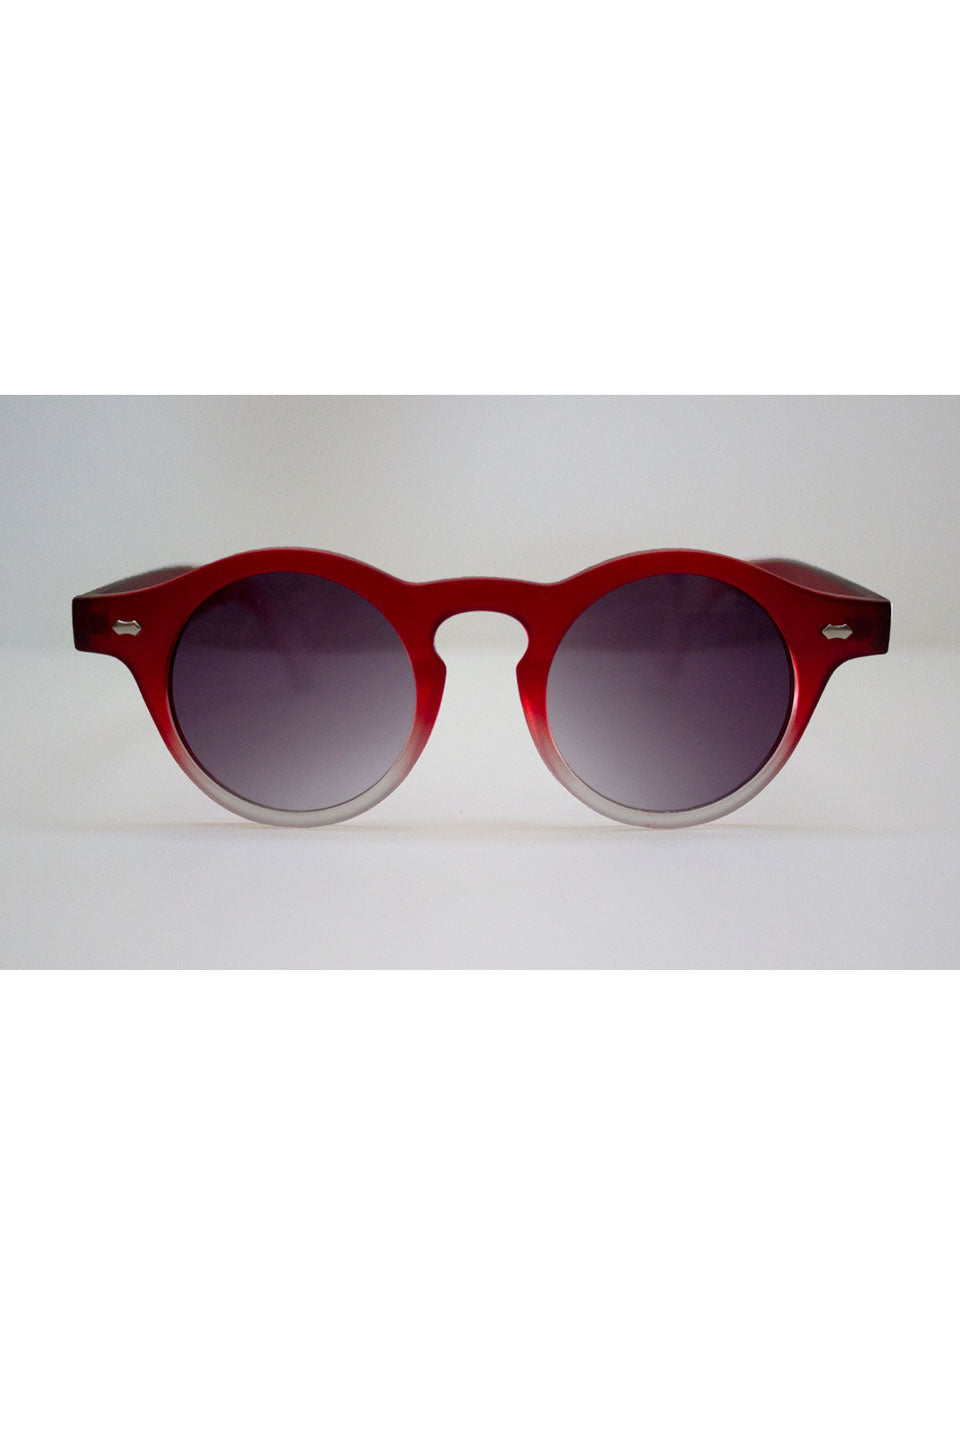 1930s Style Round Red Sunglasses 